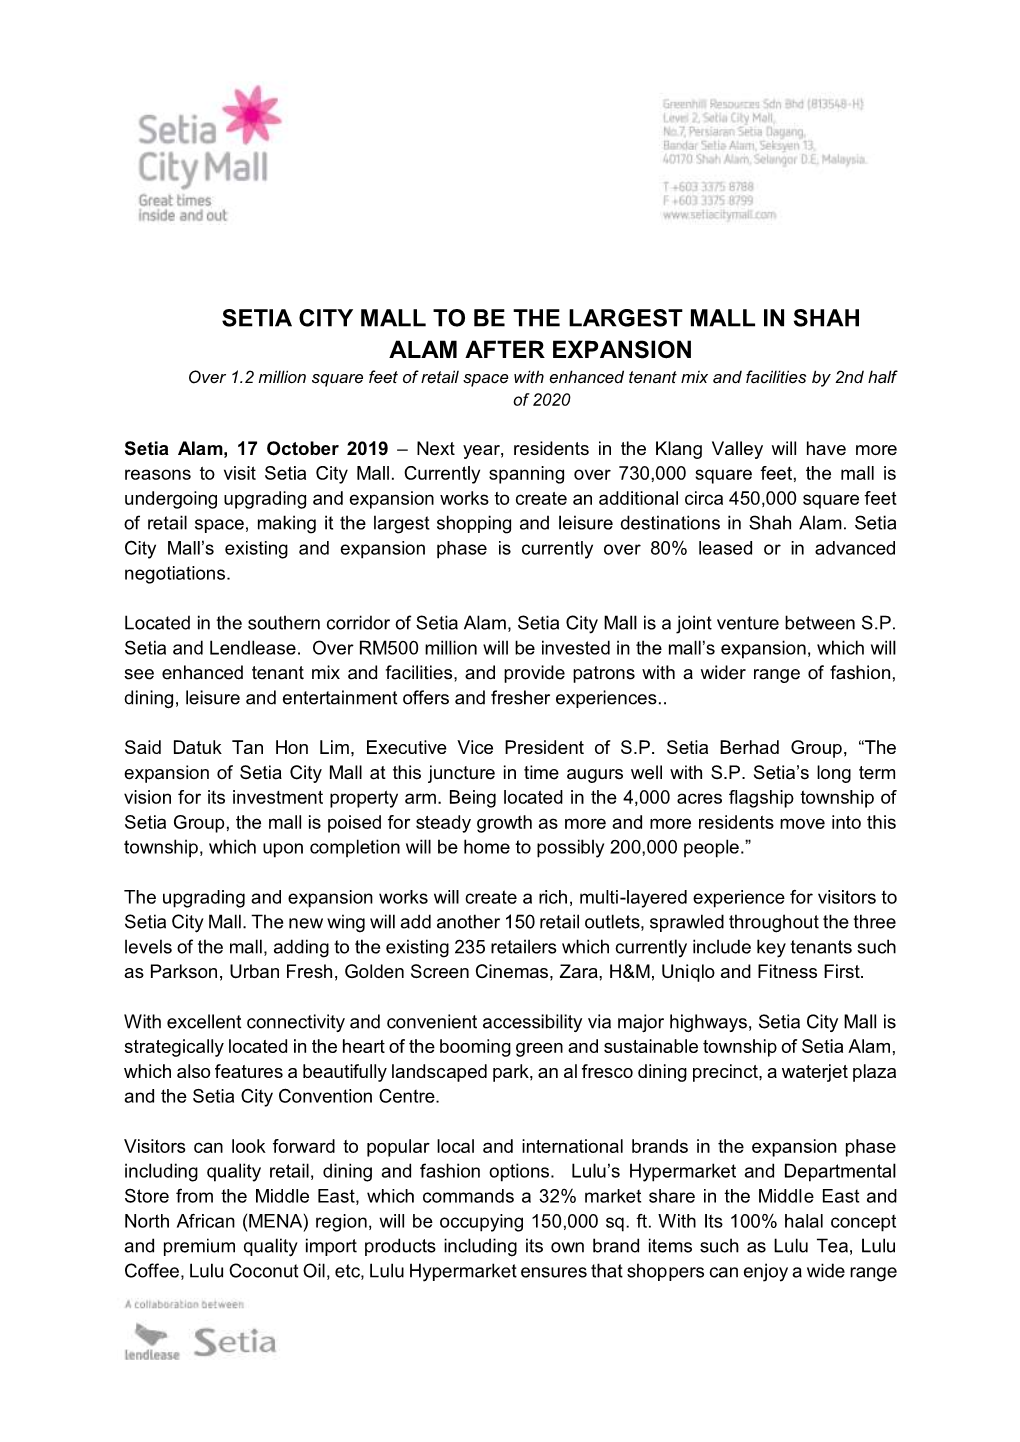 Setia City Mall to Be the Largest Mall in Shah Alam